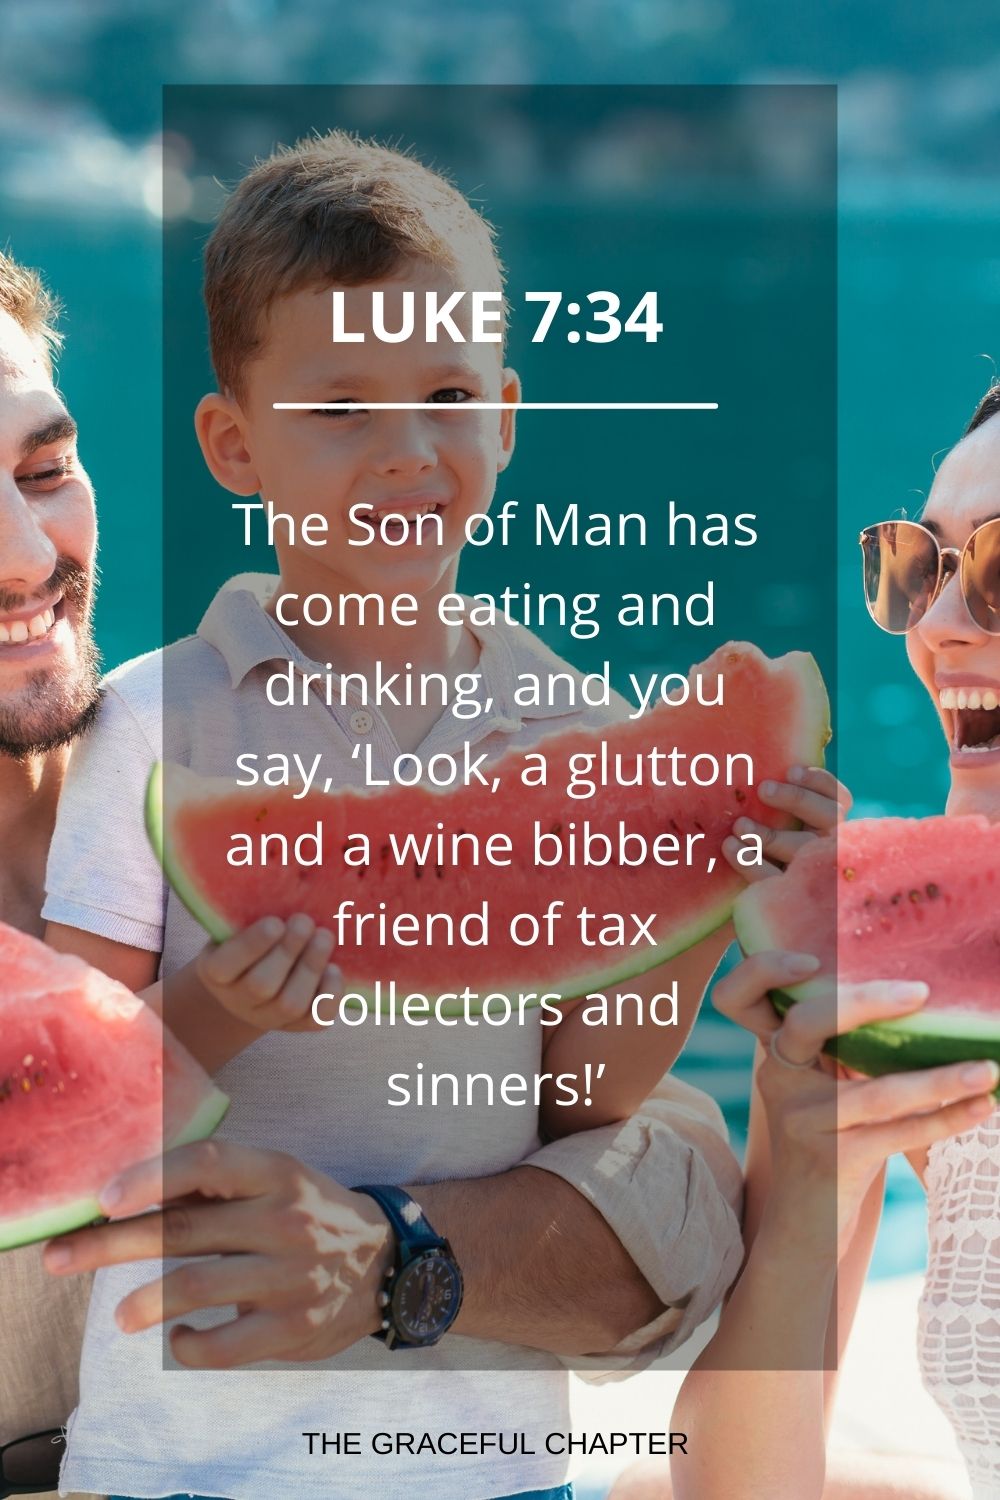 The Son of Man has come eating and drinking, and you say, ‘Look, a glutton and a wine bibber, a friend of tax collectors and sinners!’ Luke 7:34